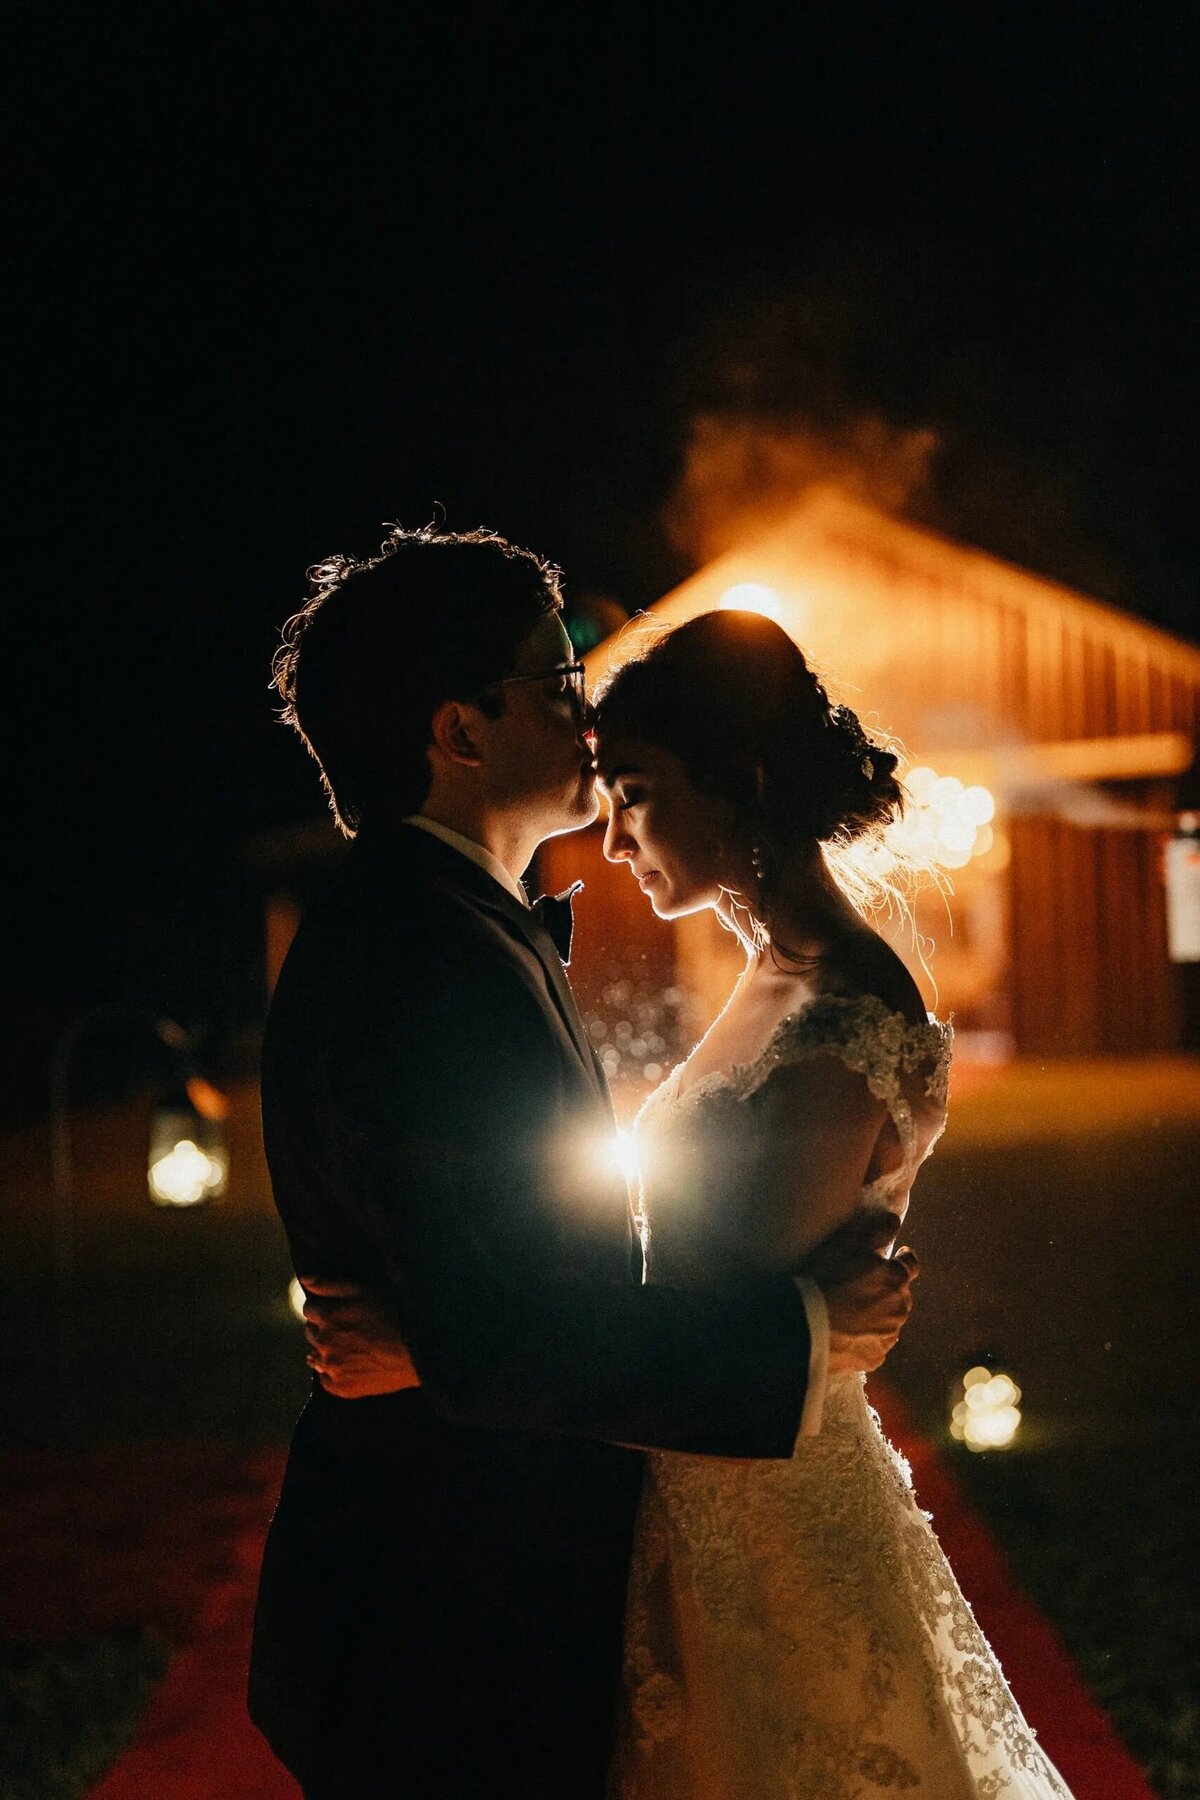 A night-time backlit photo of a bride and groom embracing, with a warm glow surrounding them